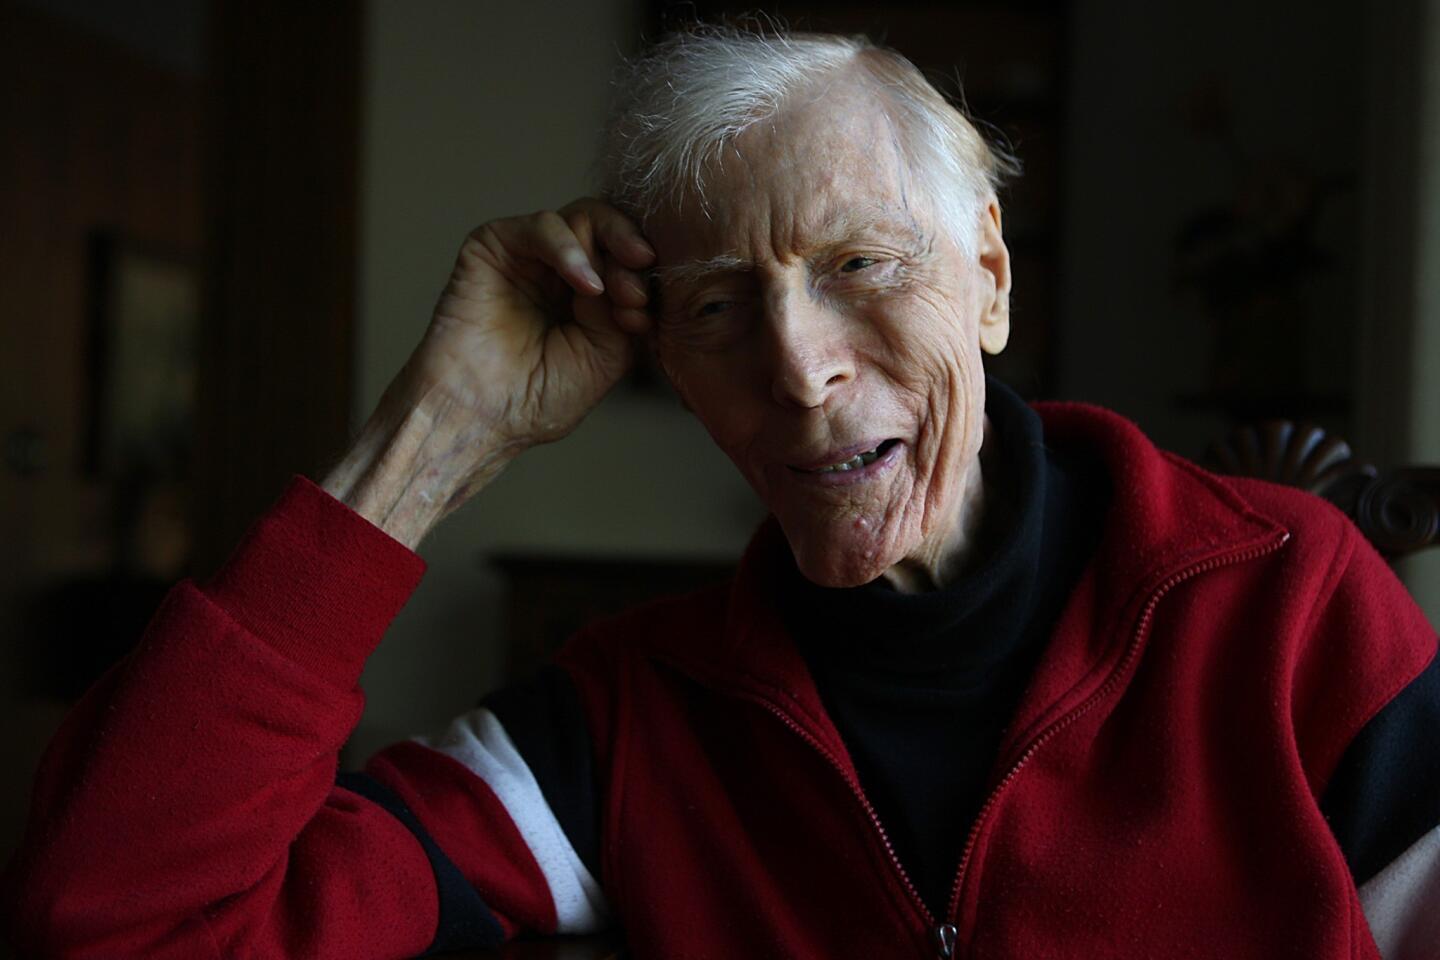 Dr. E.T. Rulison, 97, is an advocate for the "Right to Die" movement. He has a vial of methadone at home and plans to use it in the event he has a severe heart attack or stroke.